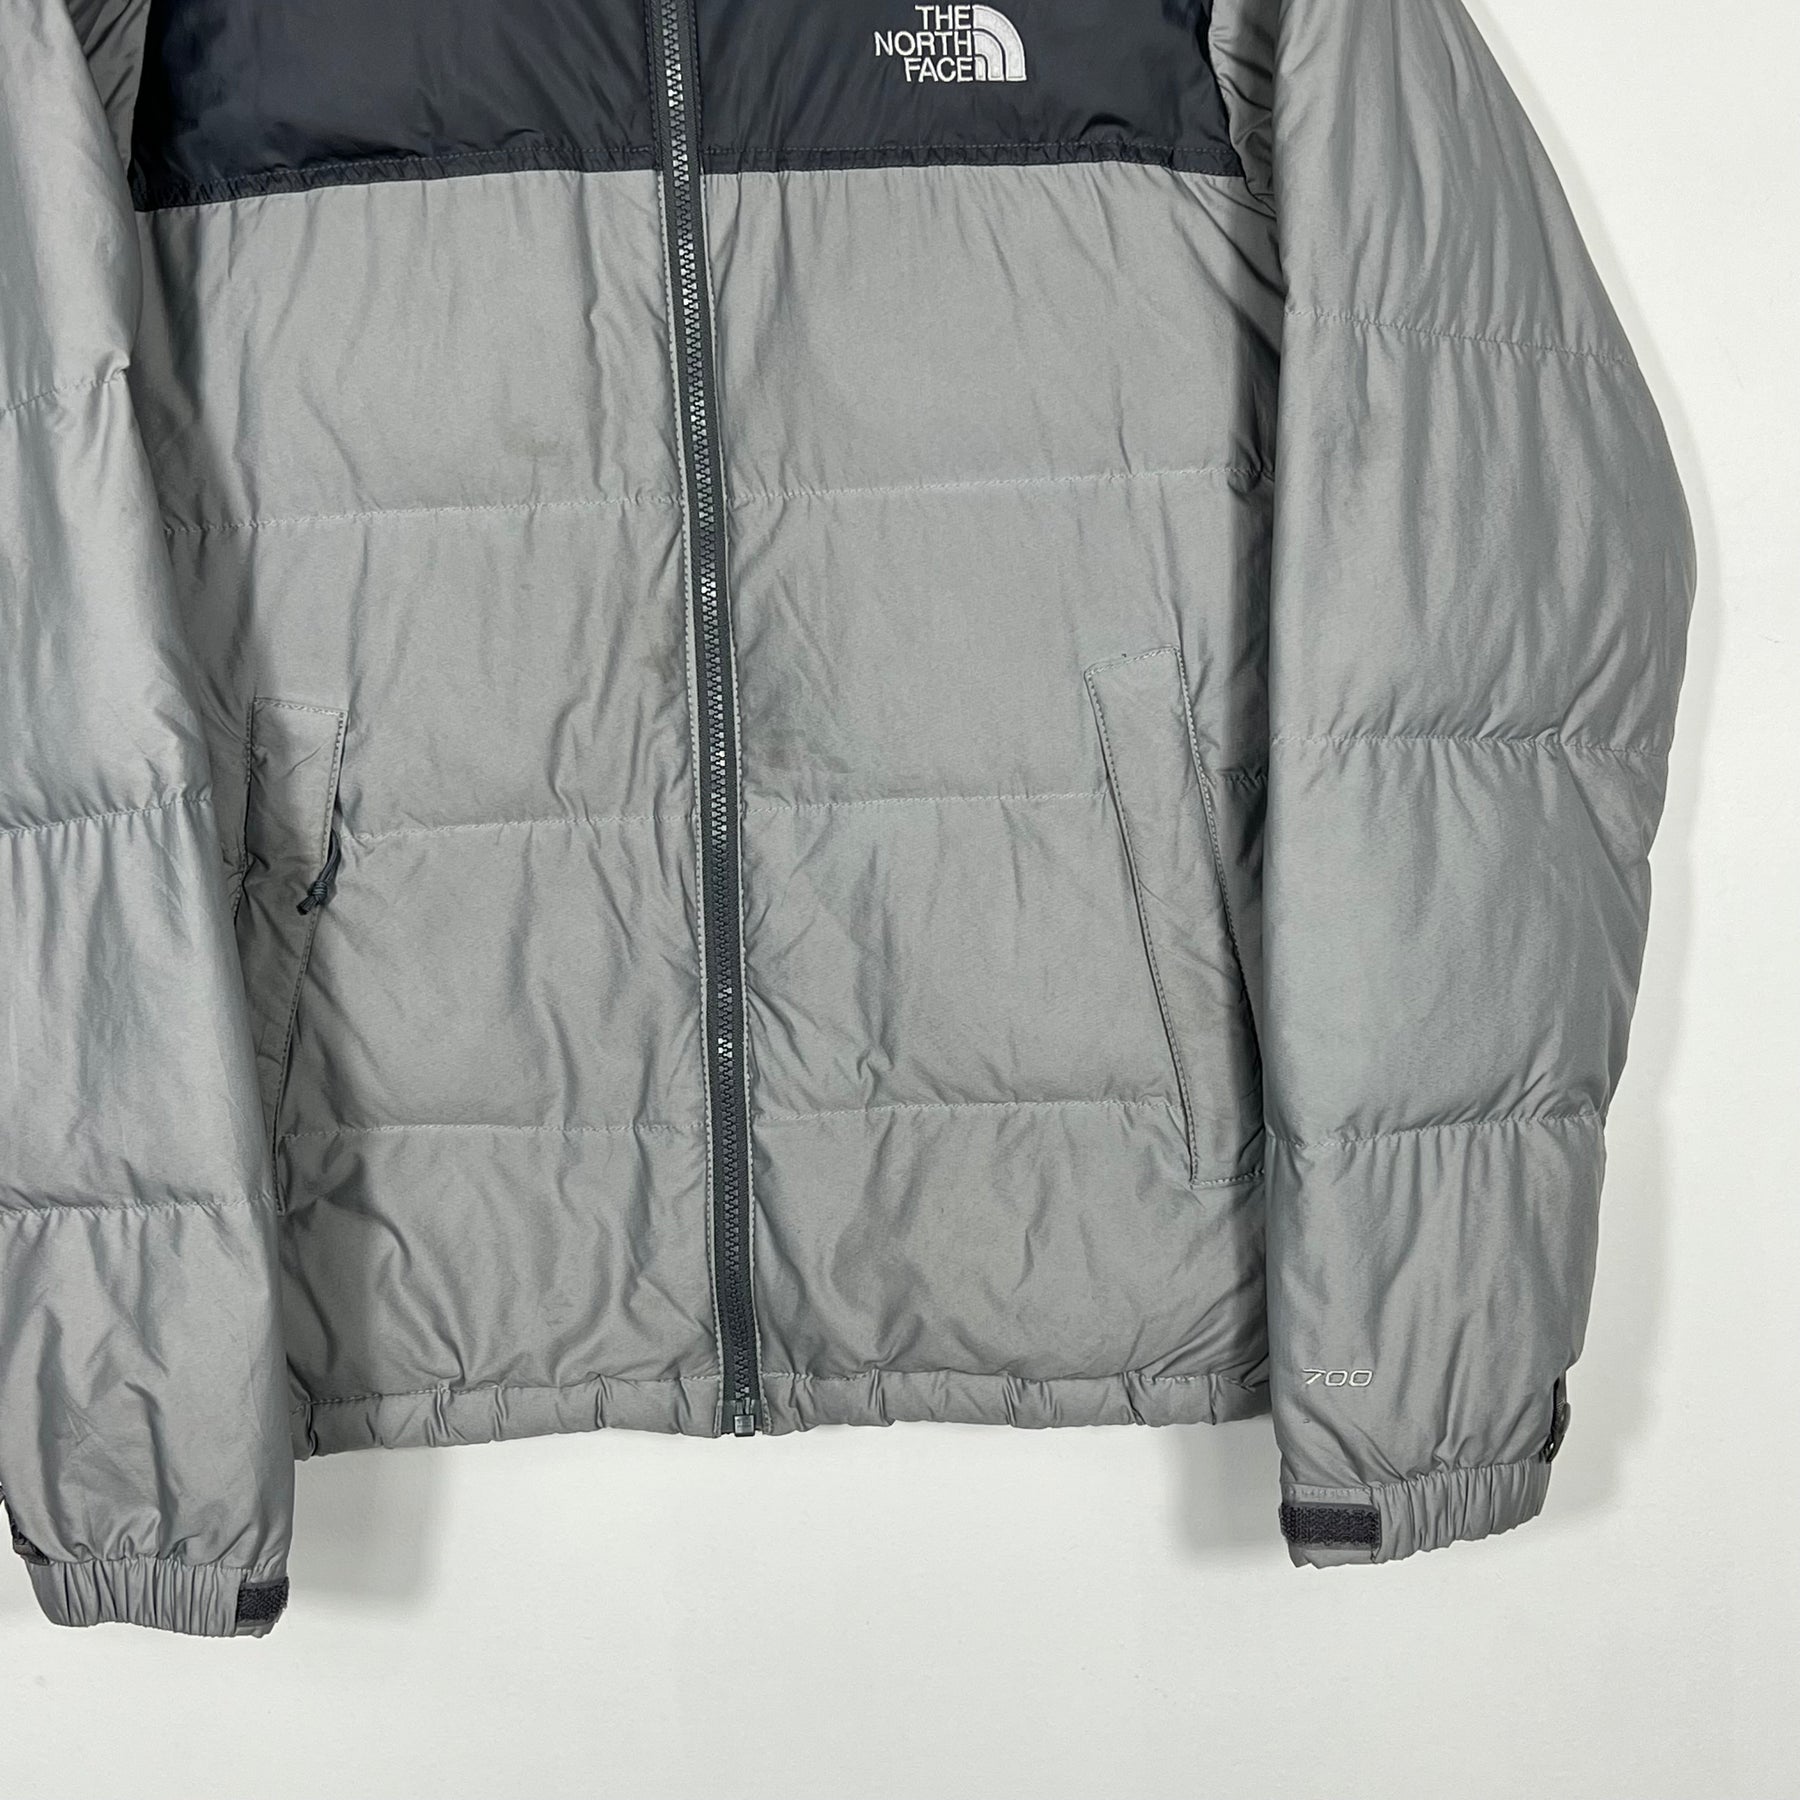 Vintage The North Face 700 Series Nuptse Puffer Jacket - Men's Small